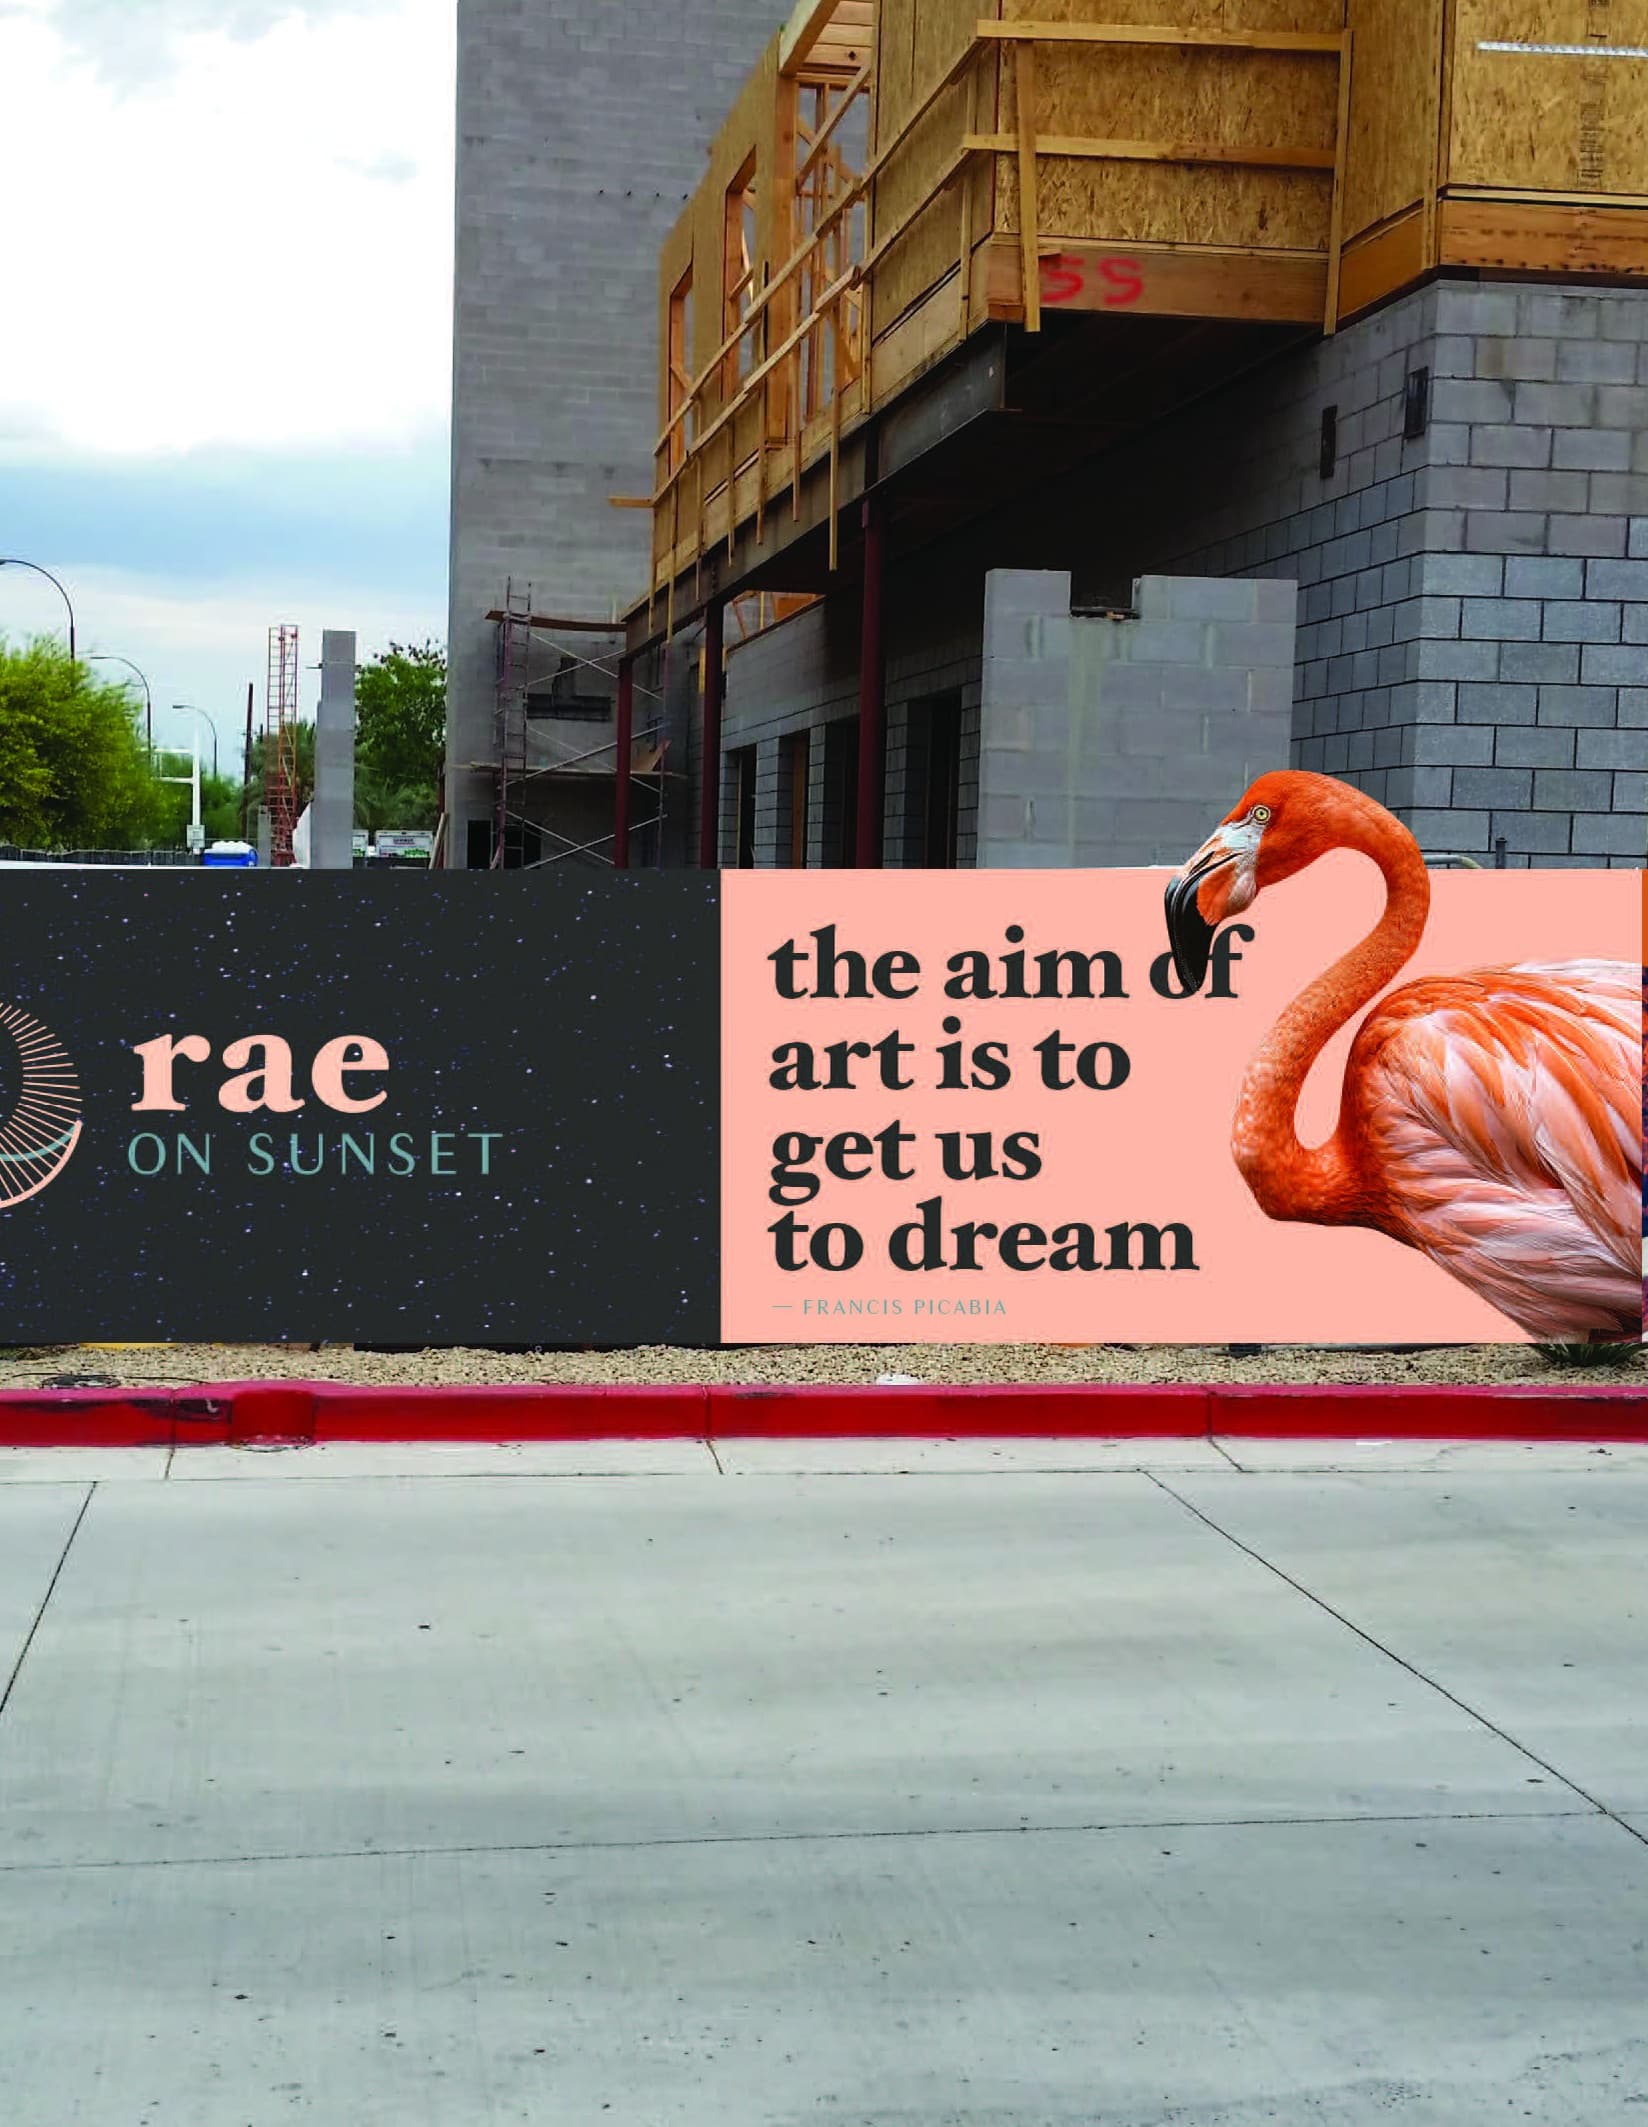 A construction billboard with a pink flamingo on it, with text that reads: "The aim of art is to get us to dream."